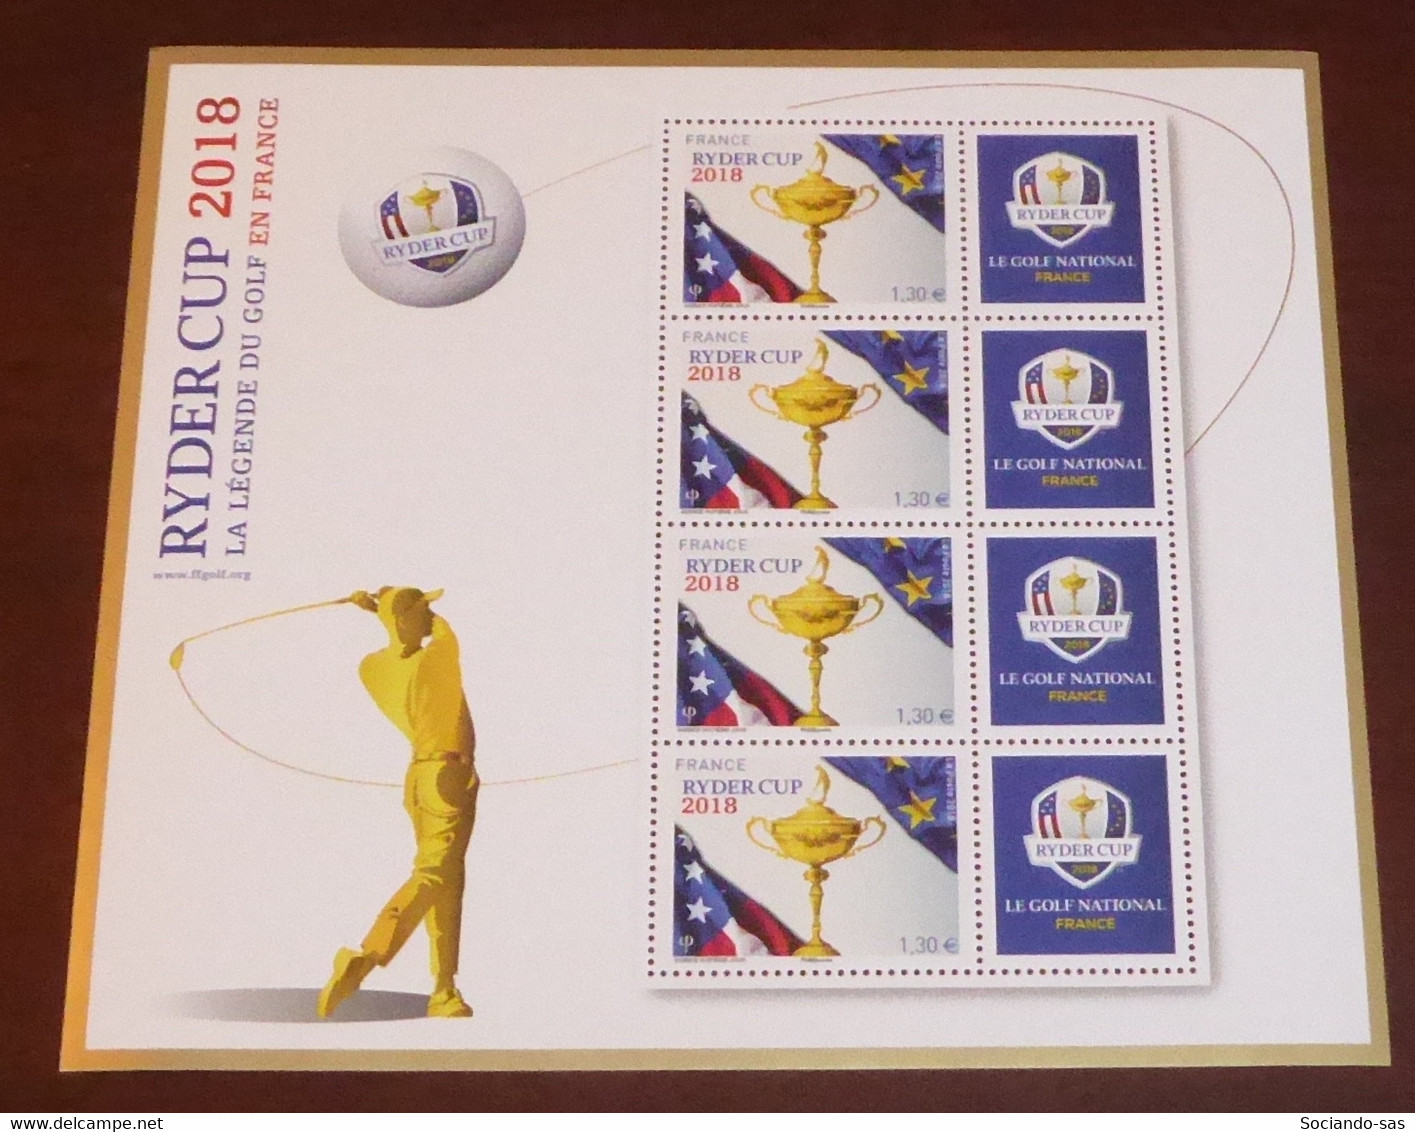 FRANCE - 2018 - Bloc Feuillet BF N°Yv. 142 - Golf / Ryder Cup - Neuf Luxe ** / MNH / Postfrisch - Nuovi